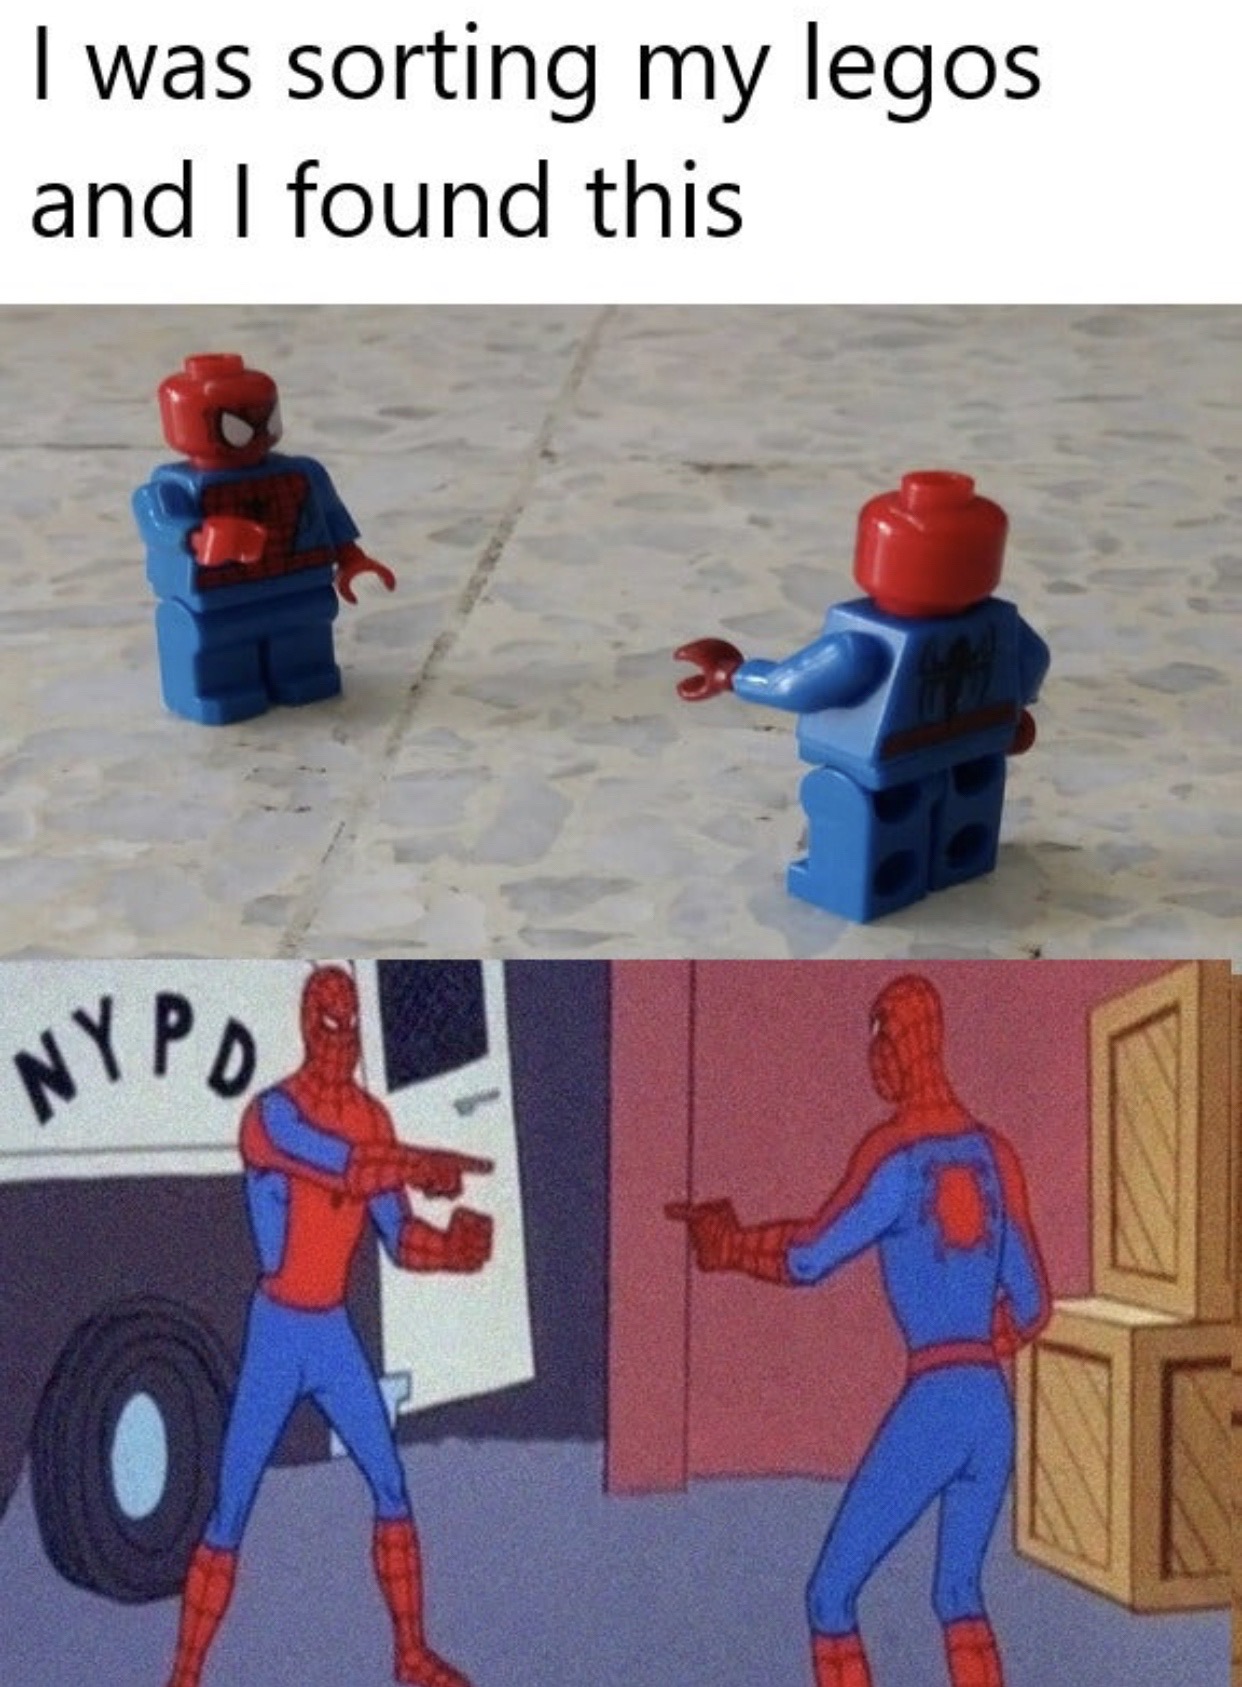 bad spiderman memes - I was sorting my legos and I found this Nypo o